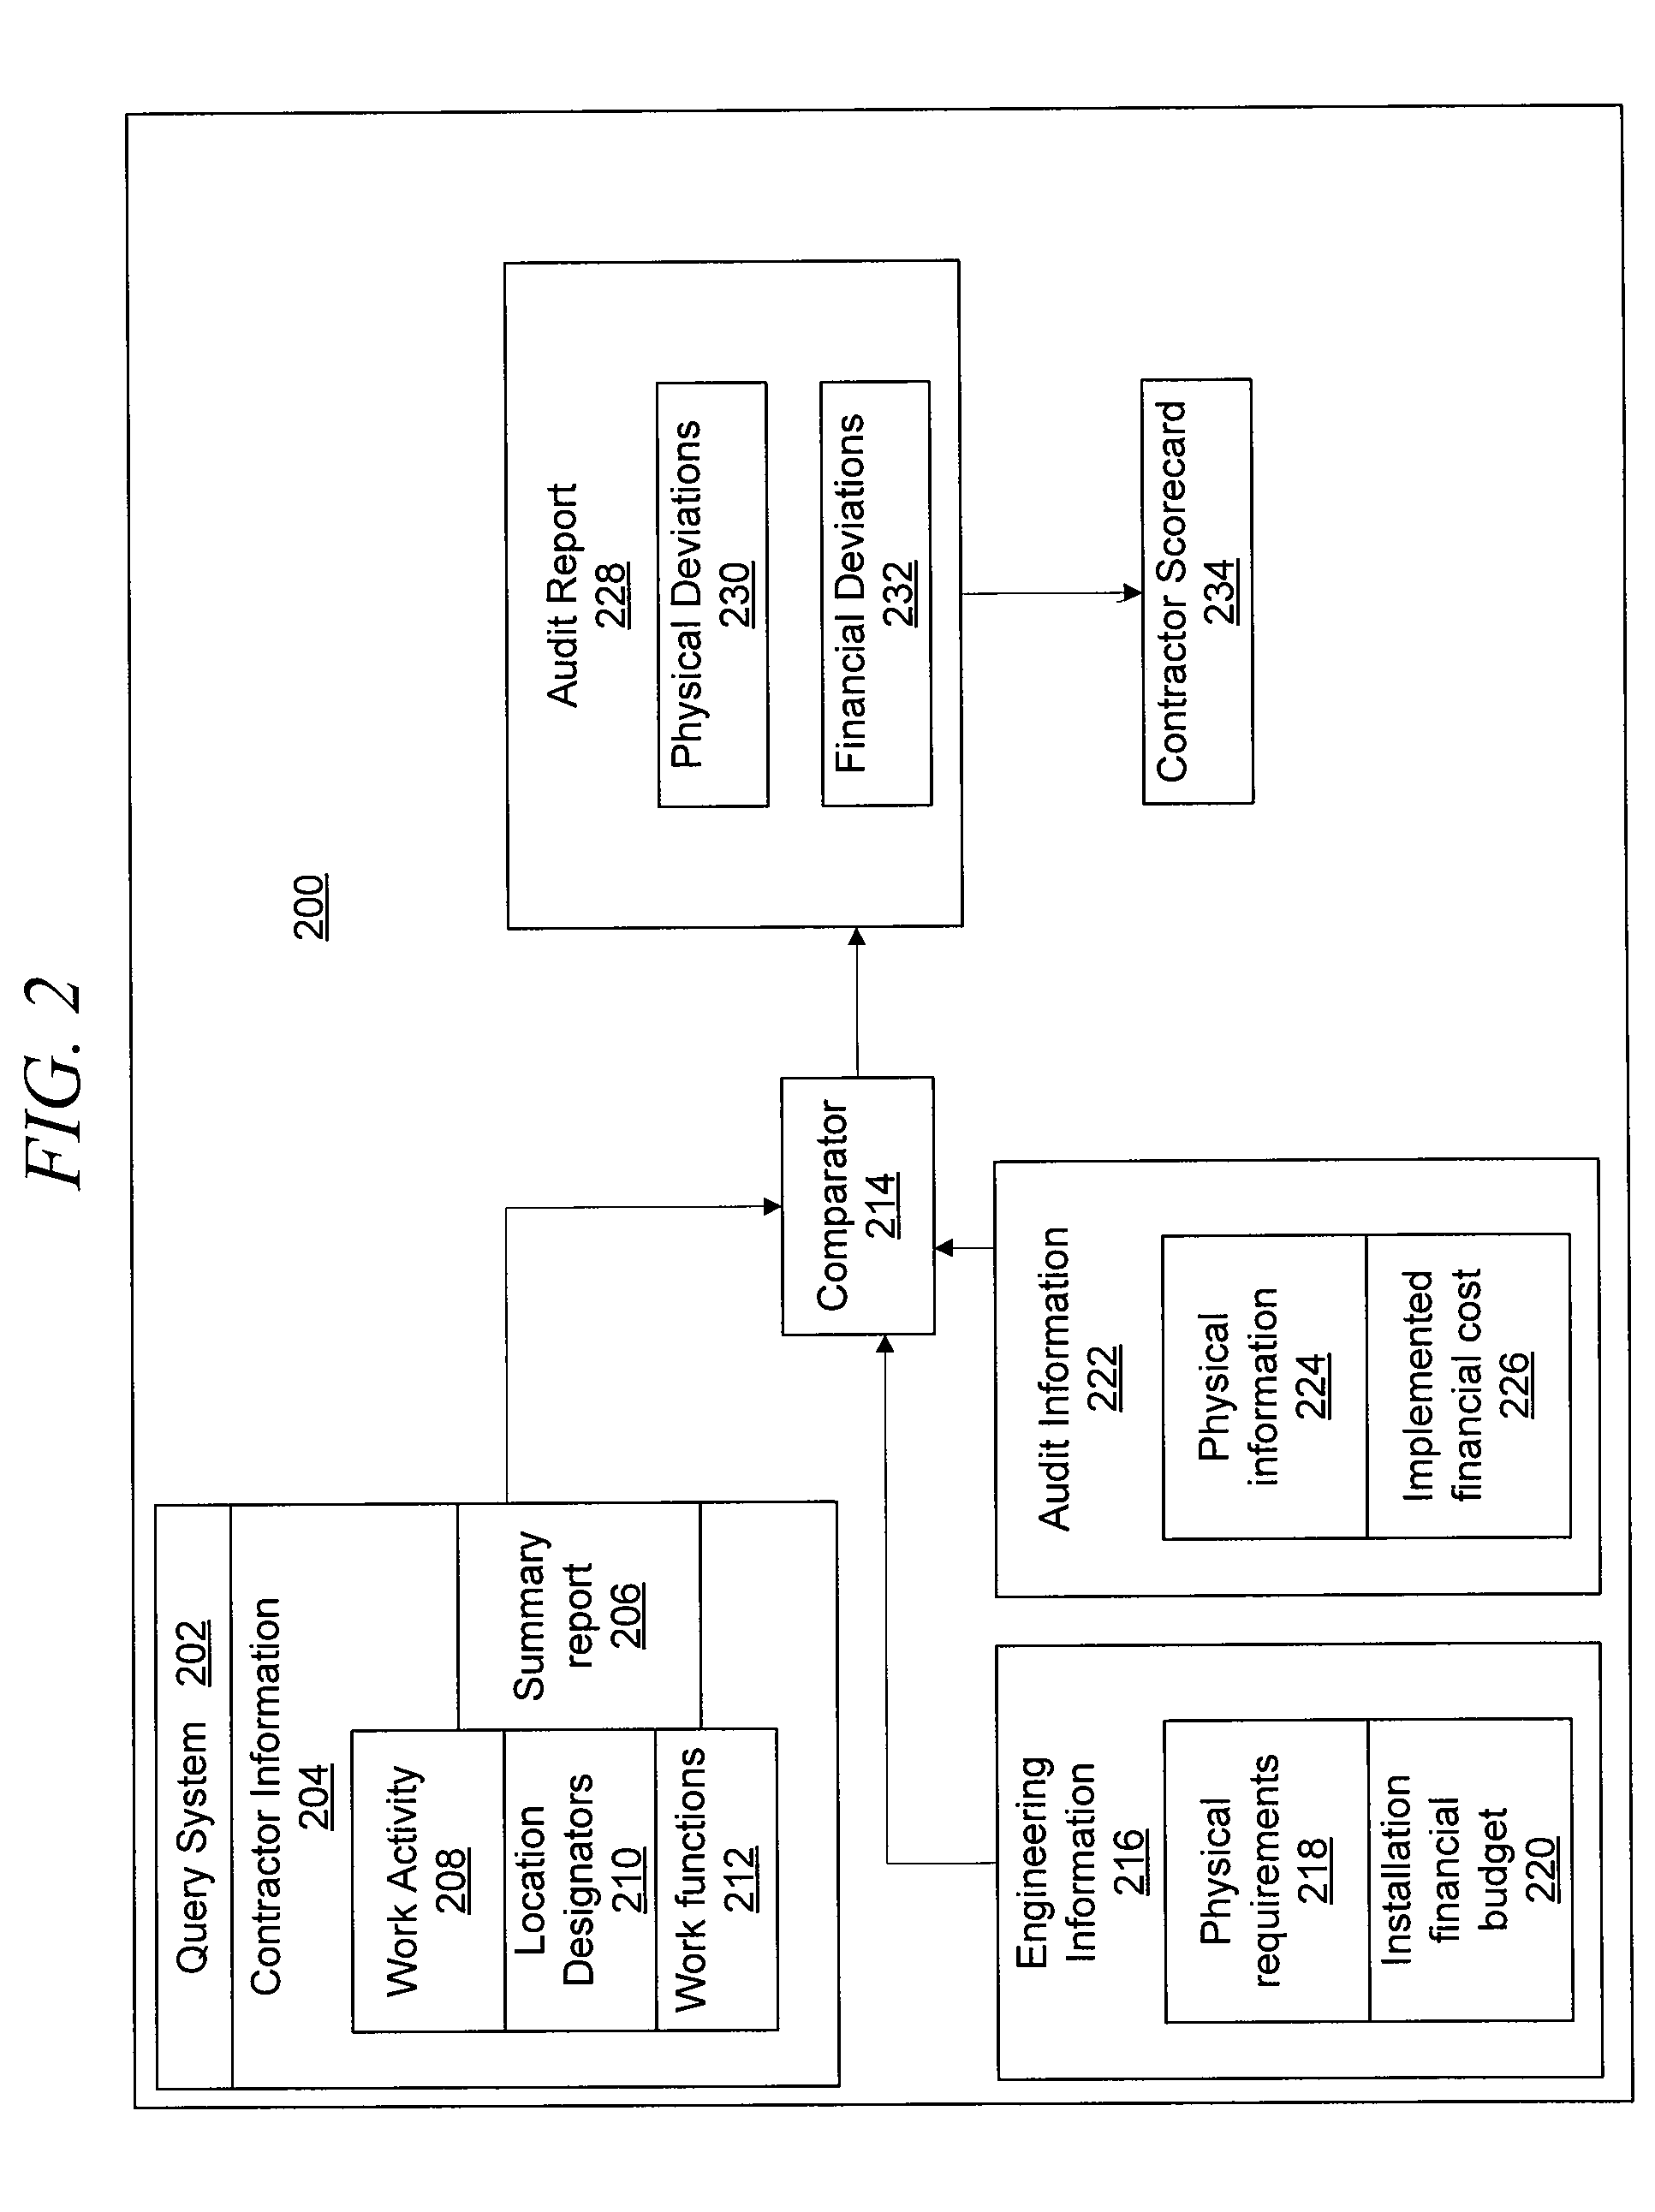 System and method for an audit tool for communications service providers